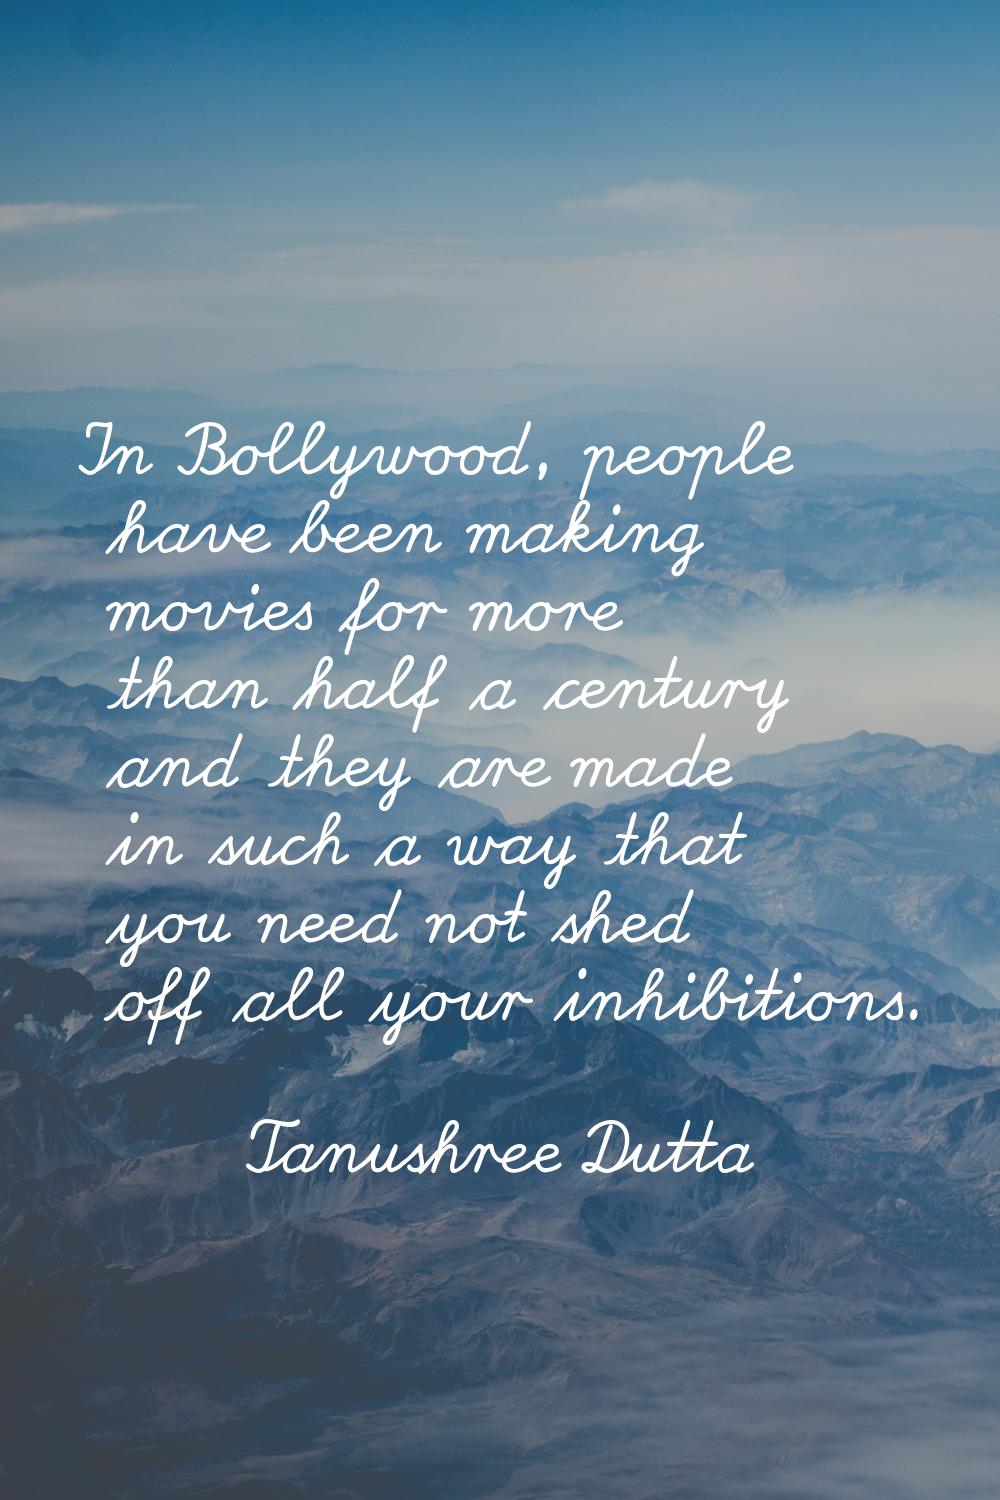 In Bollywood, people have been making movies for more than half a century and they are made in such